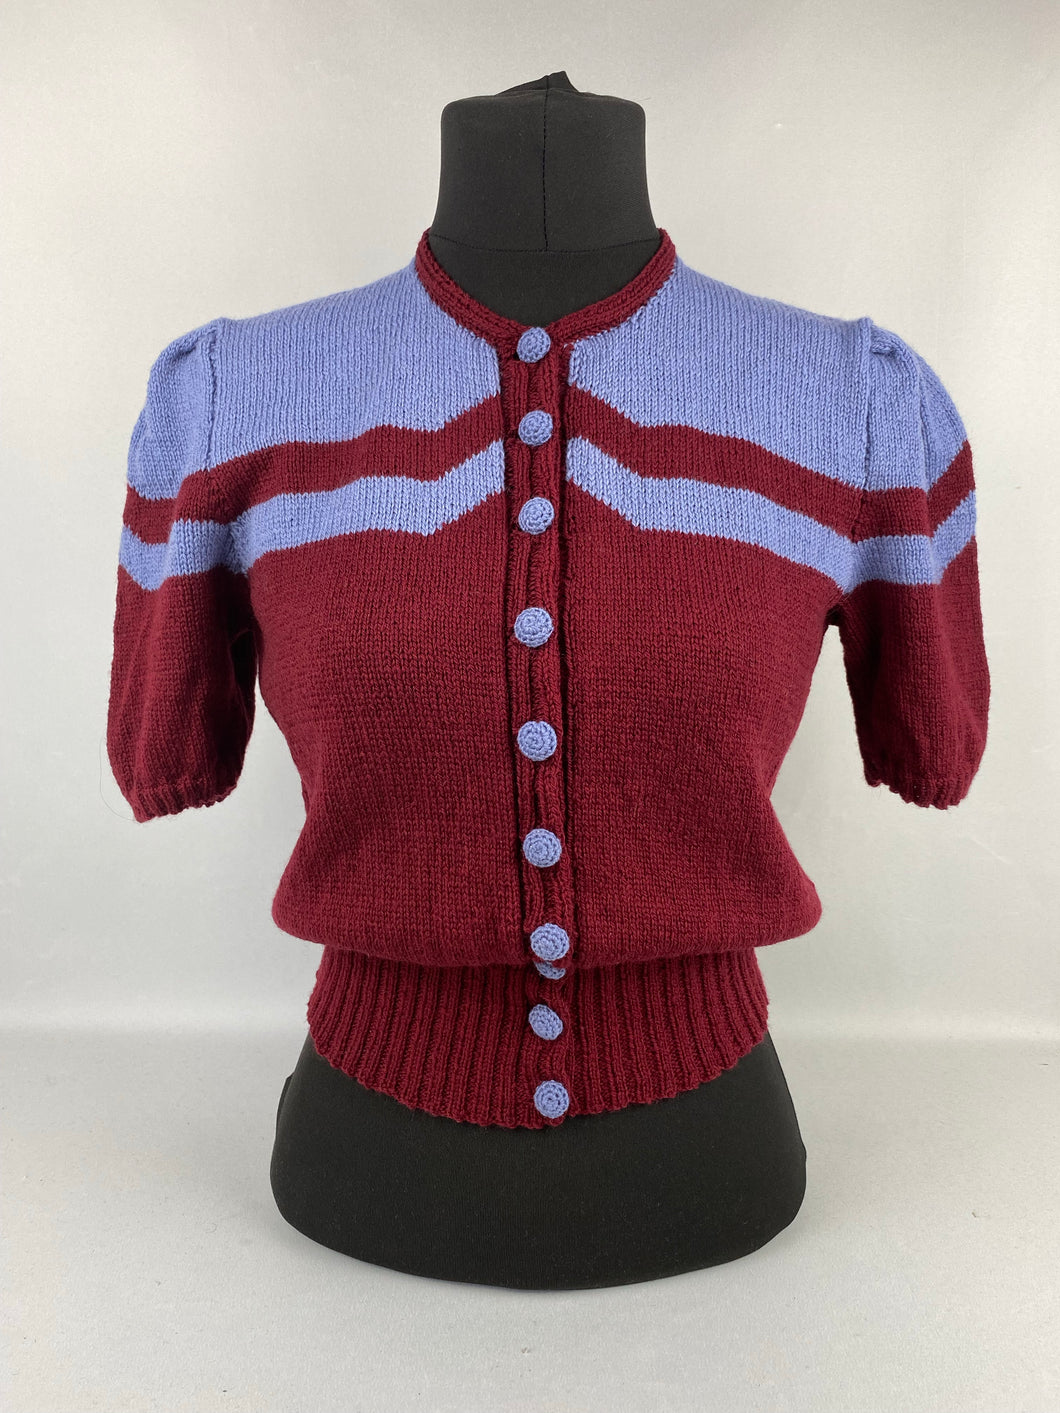 1940s Reproduction Cardigan Jacket in Burgundy and Lavender Blue Stripes - Bust 34 35 36